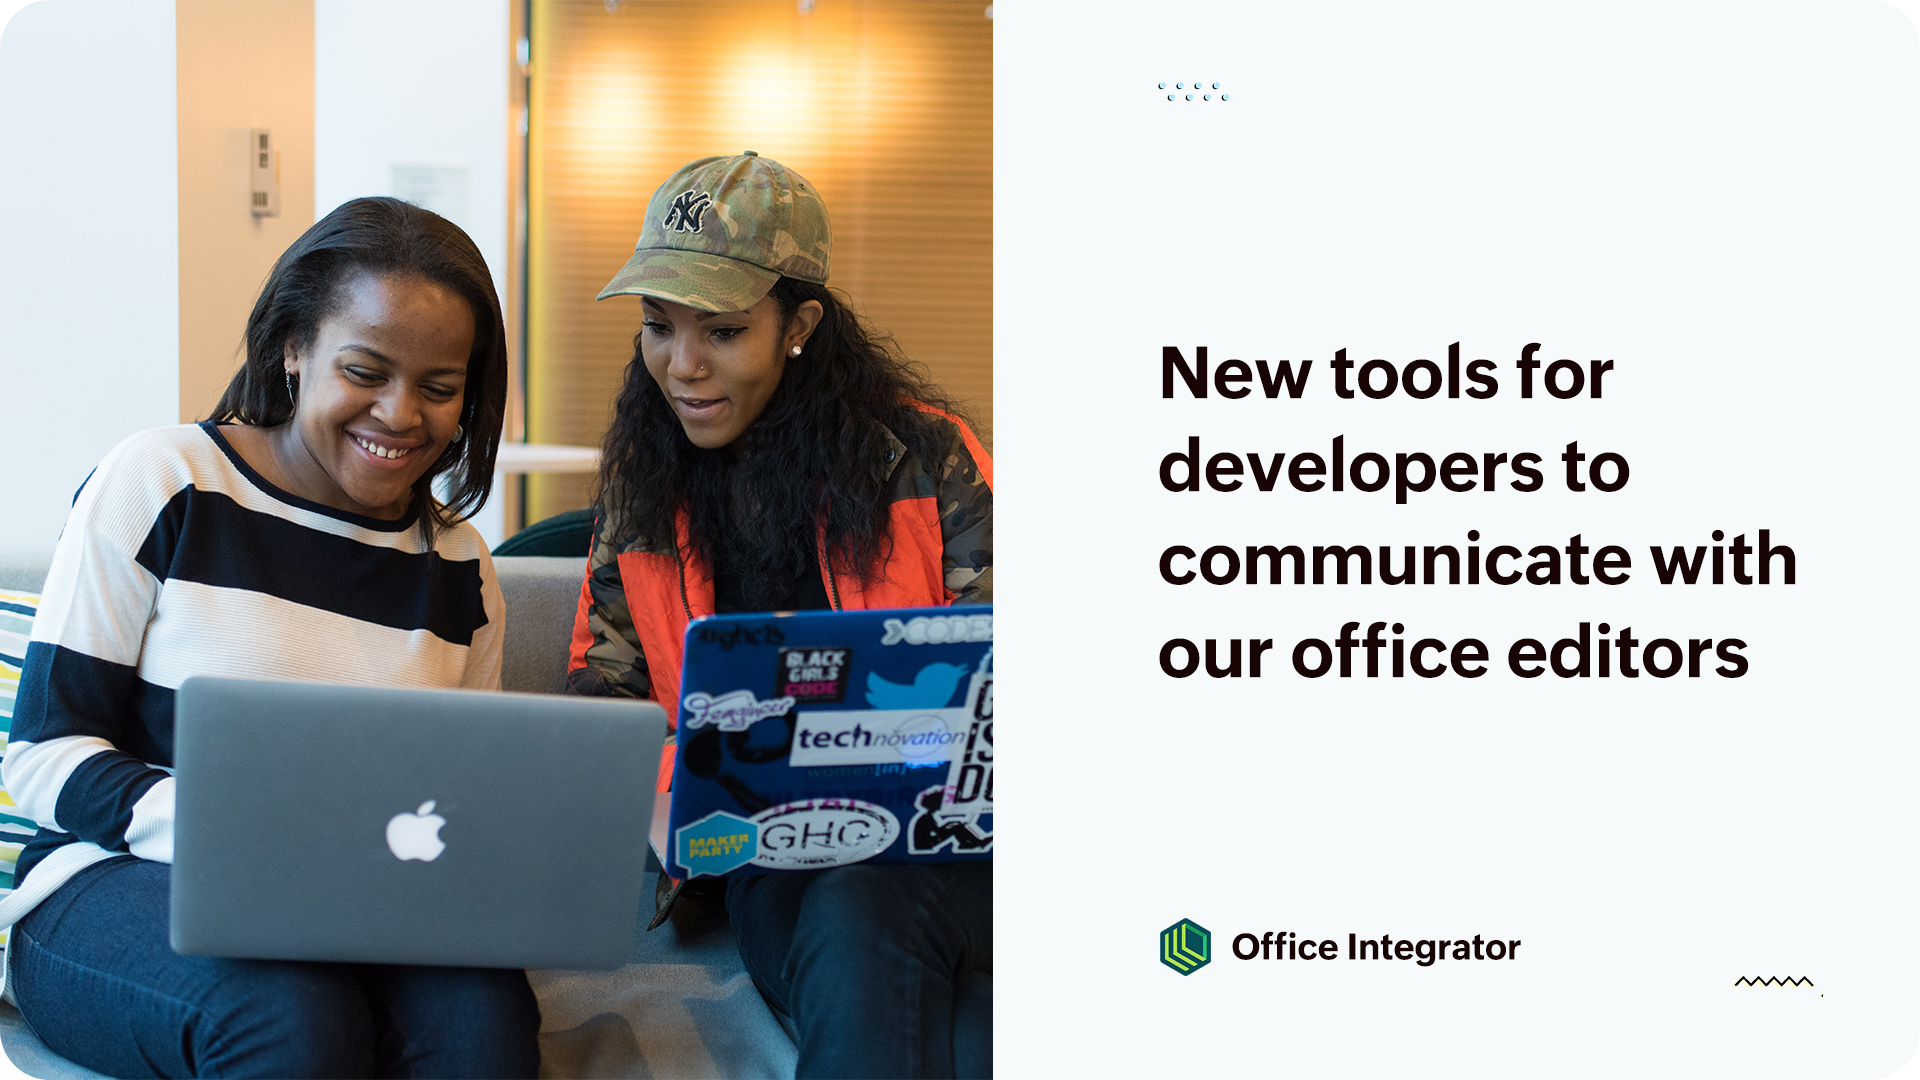 Introducing new ways for developers to control and communicate with our office editors